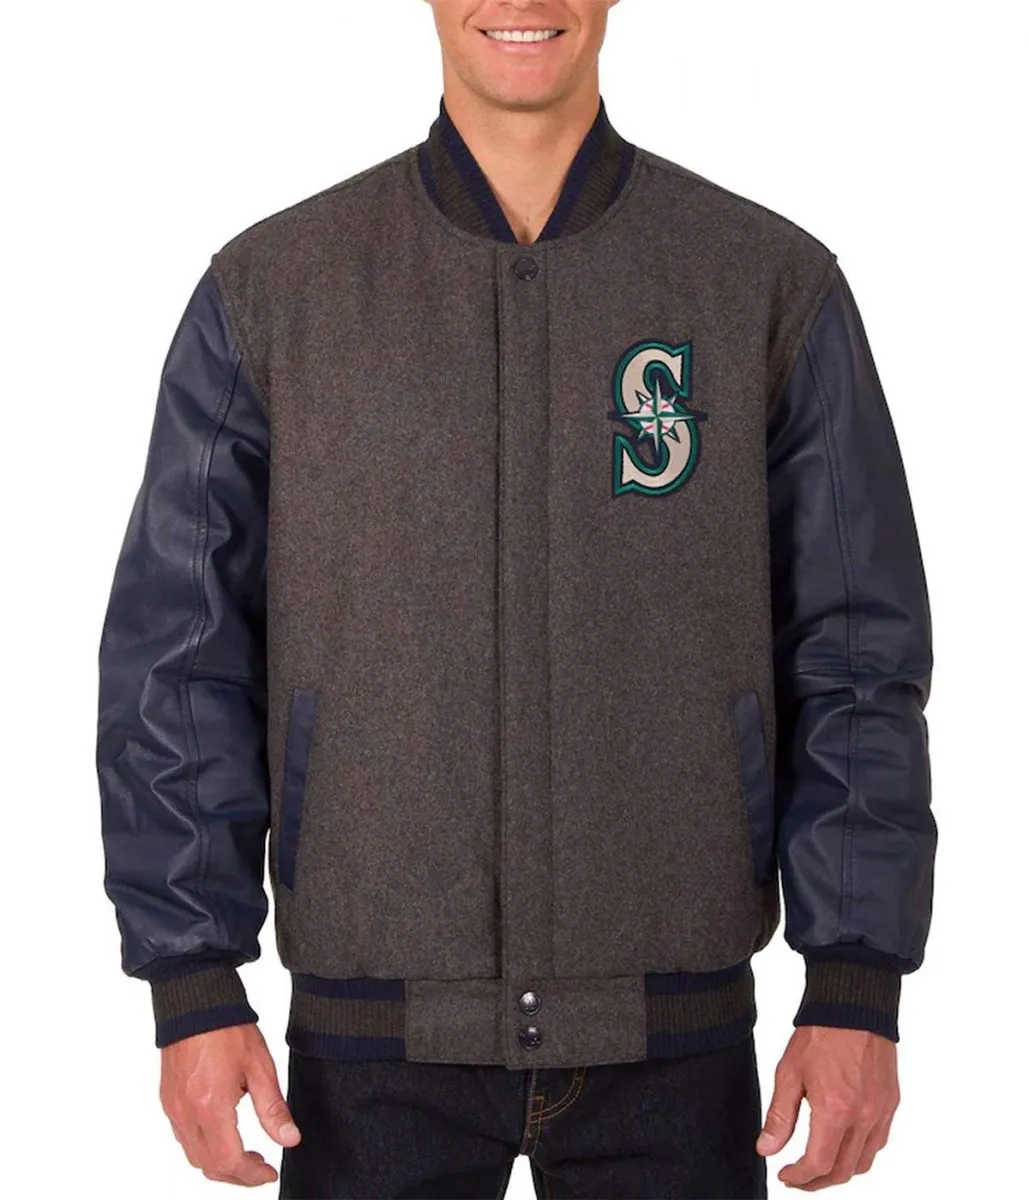 Seattle Mariners Navy Blue and Charcoal Letterman Jacket